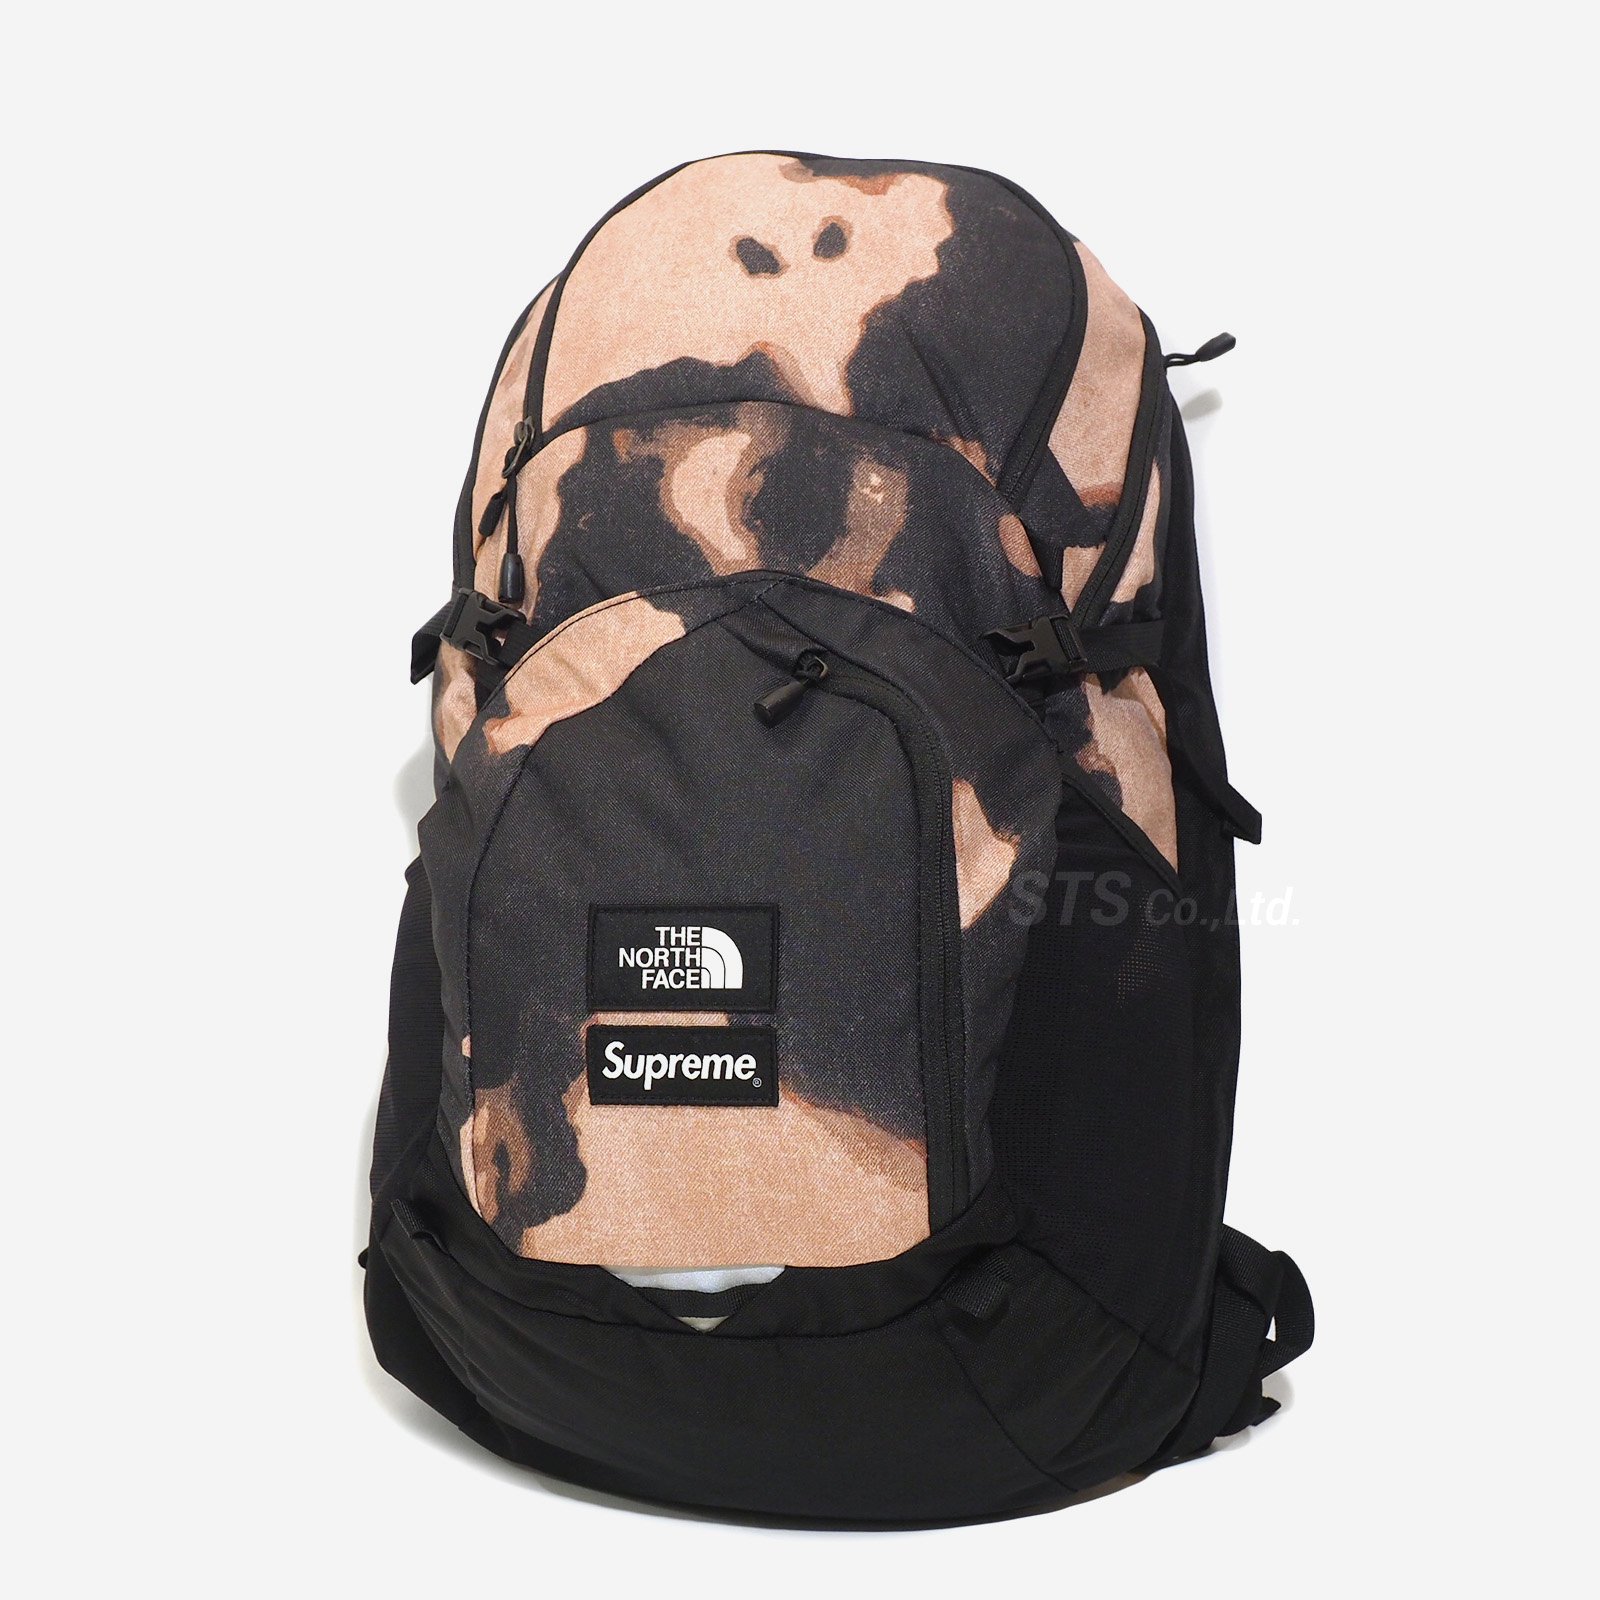 Supreme The North Face Backpack デッドストック 2021新入荷